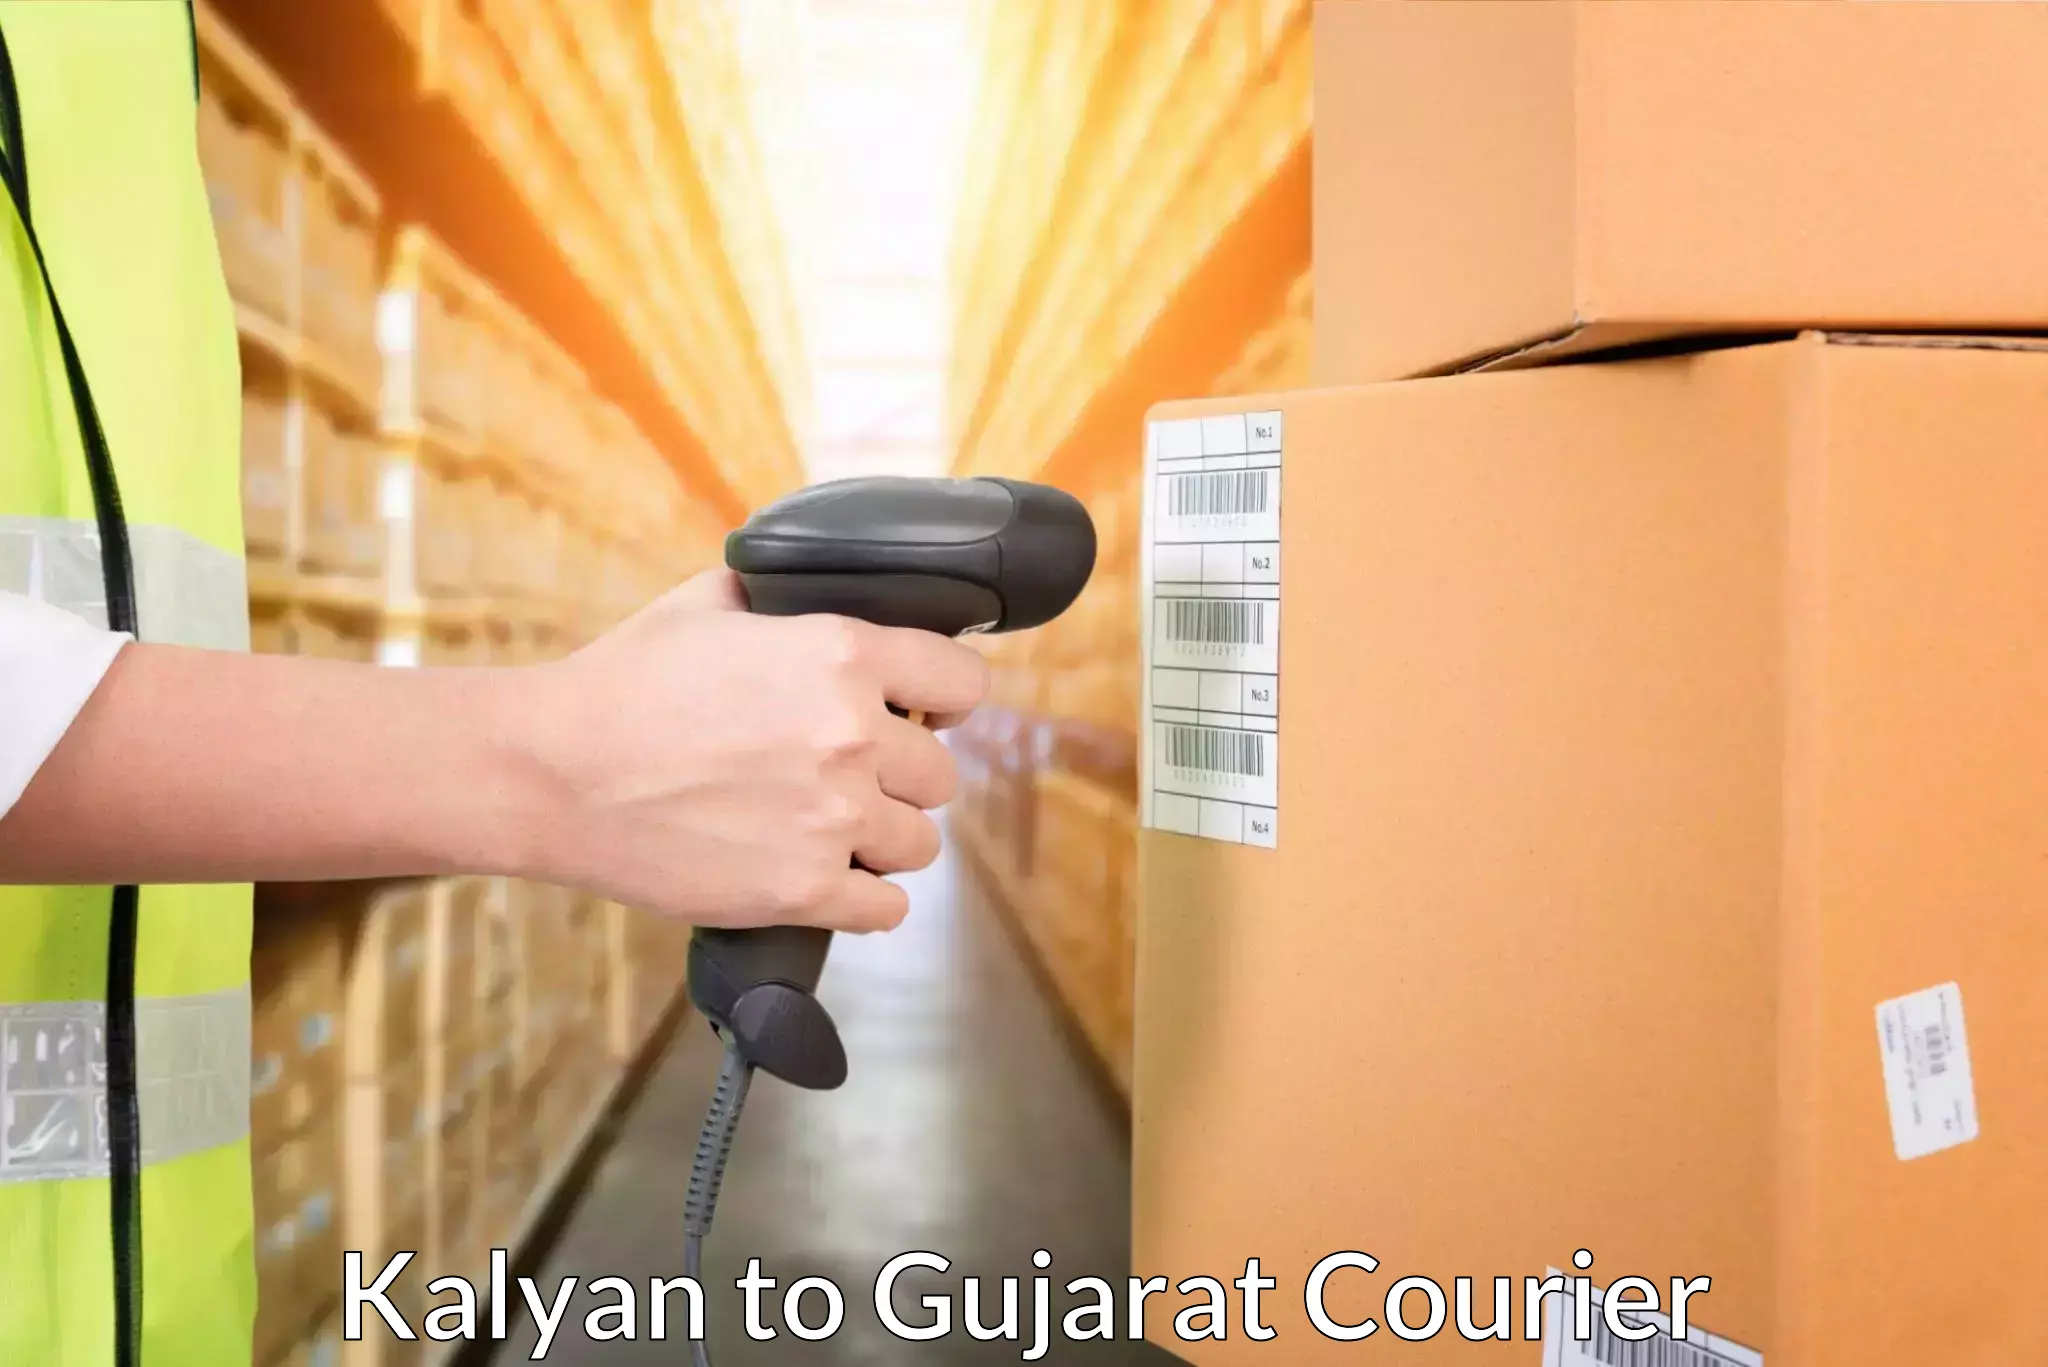 Customizable delivery plans in Kalyan to Tarapur